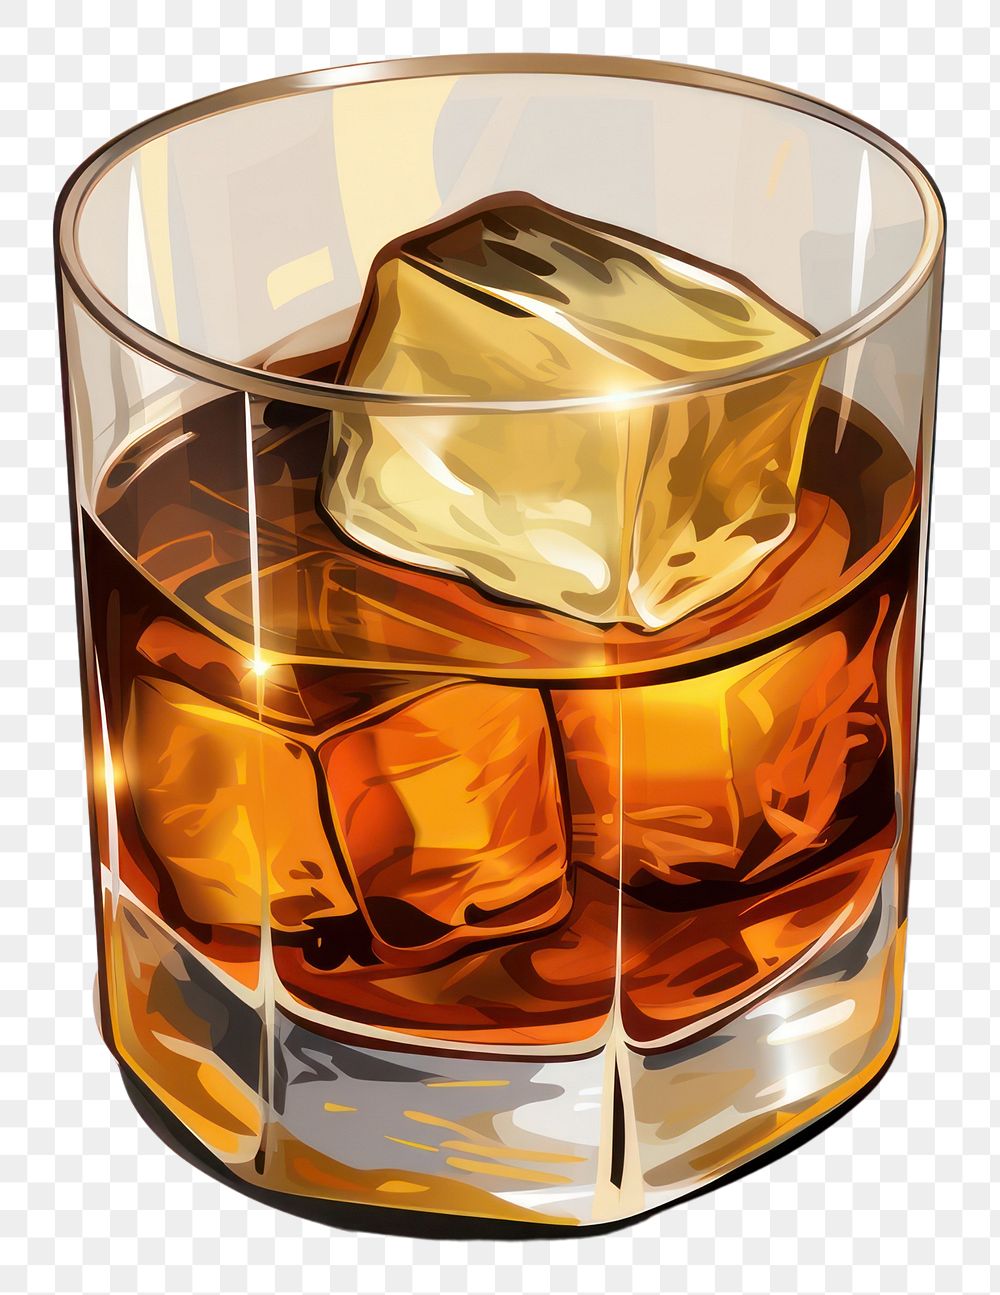 PNG Clipart alcohol illustration whisky drink glass.